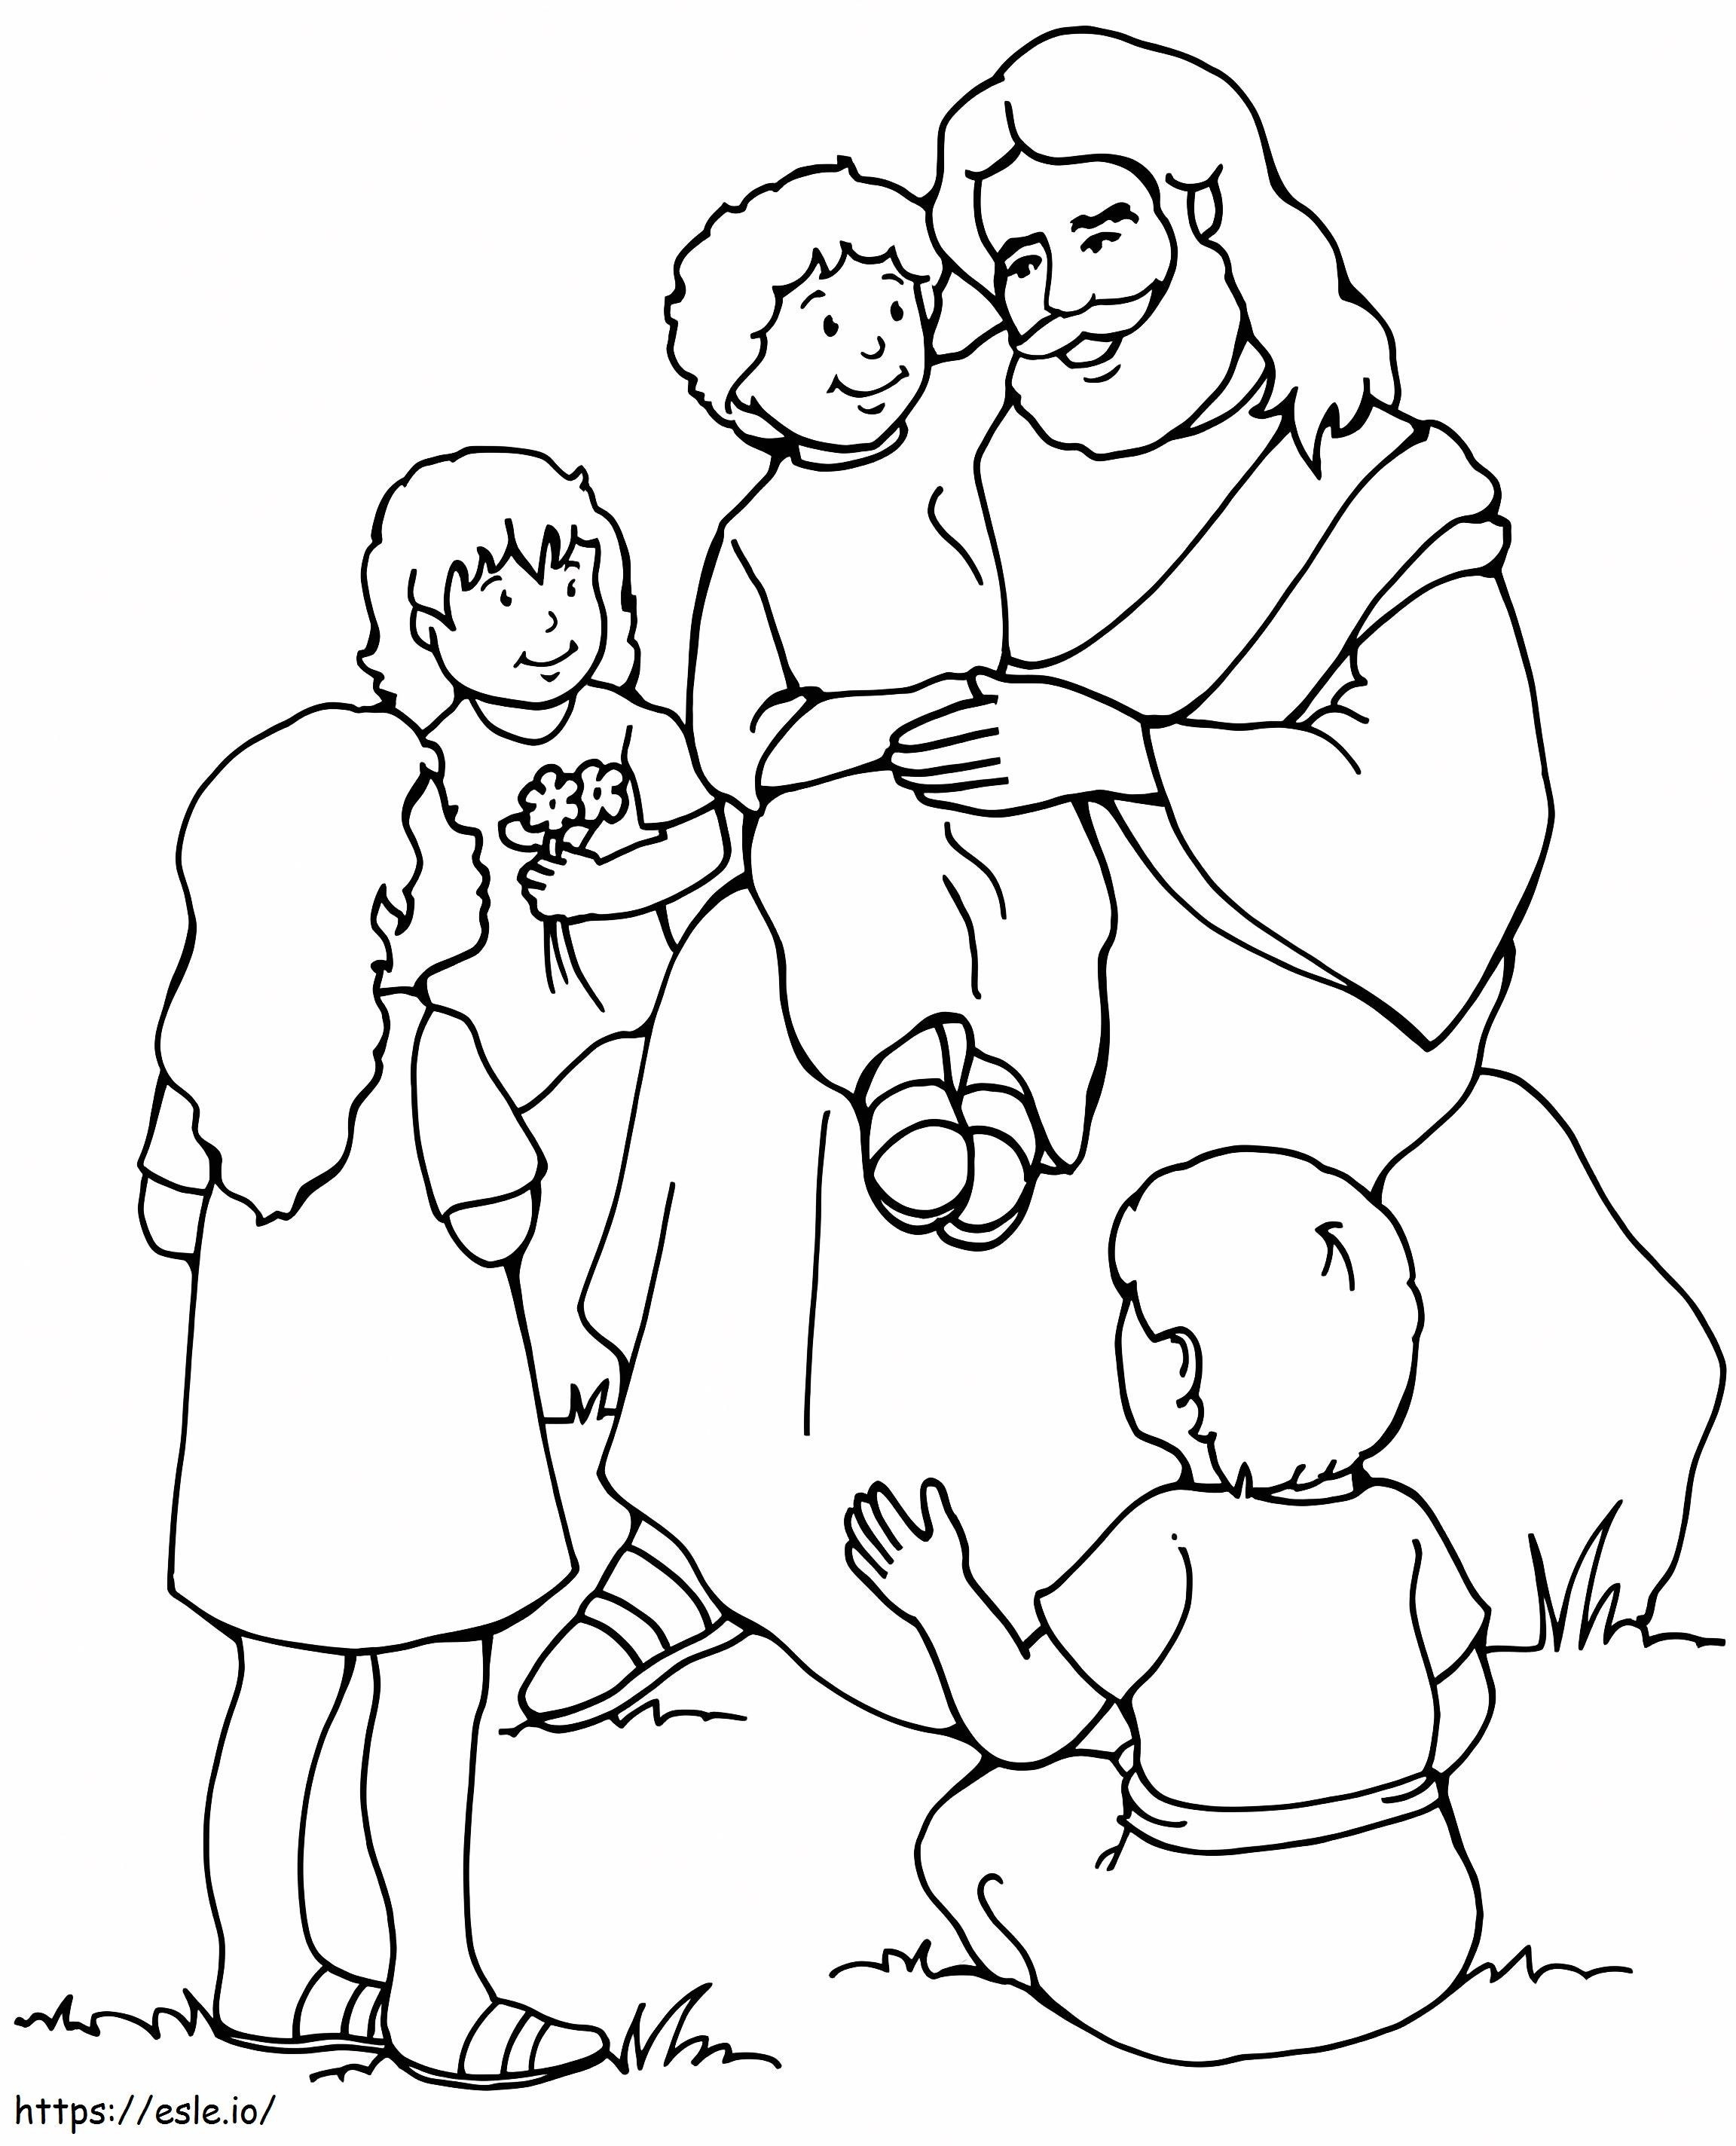 Jesus And The Children coloring page